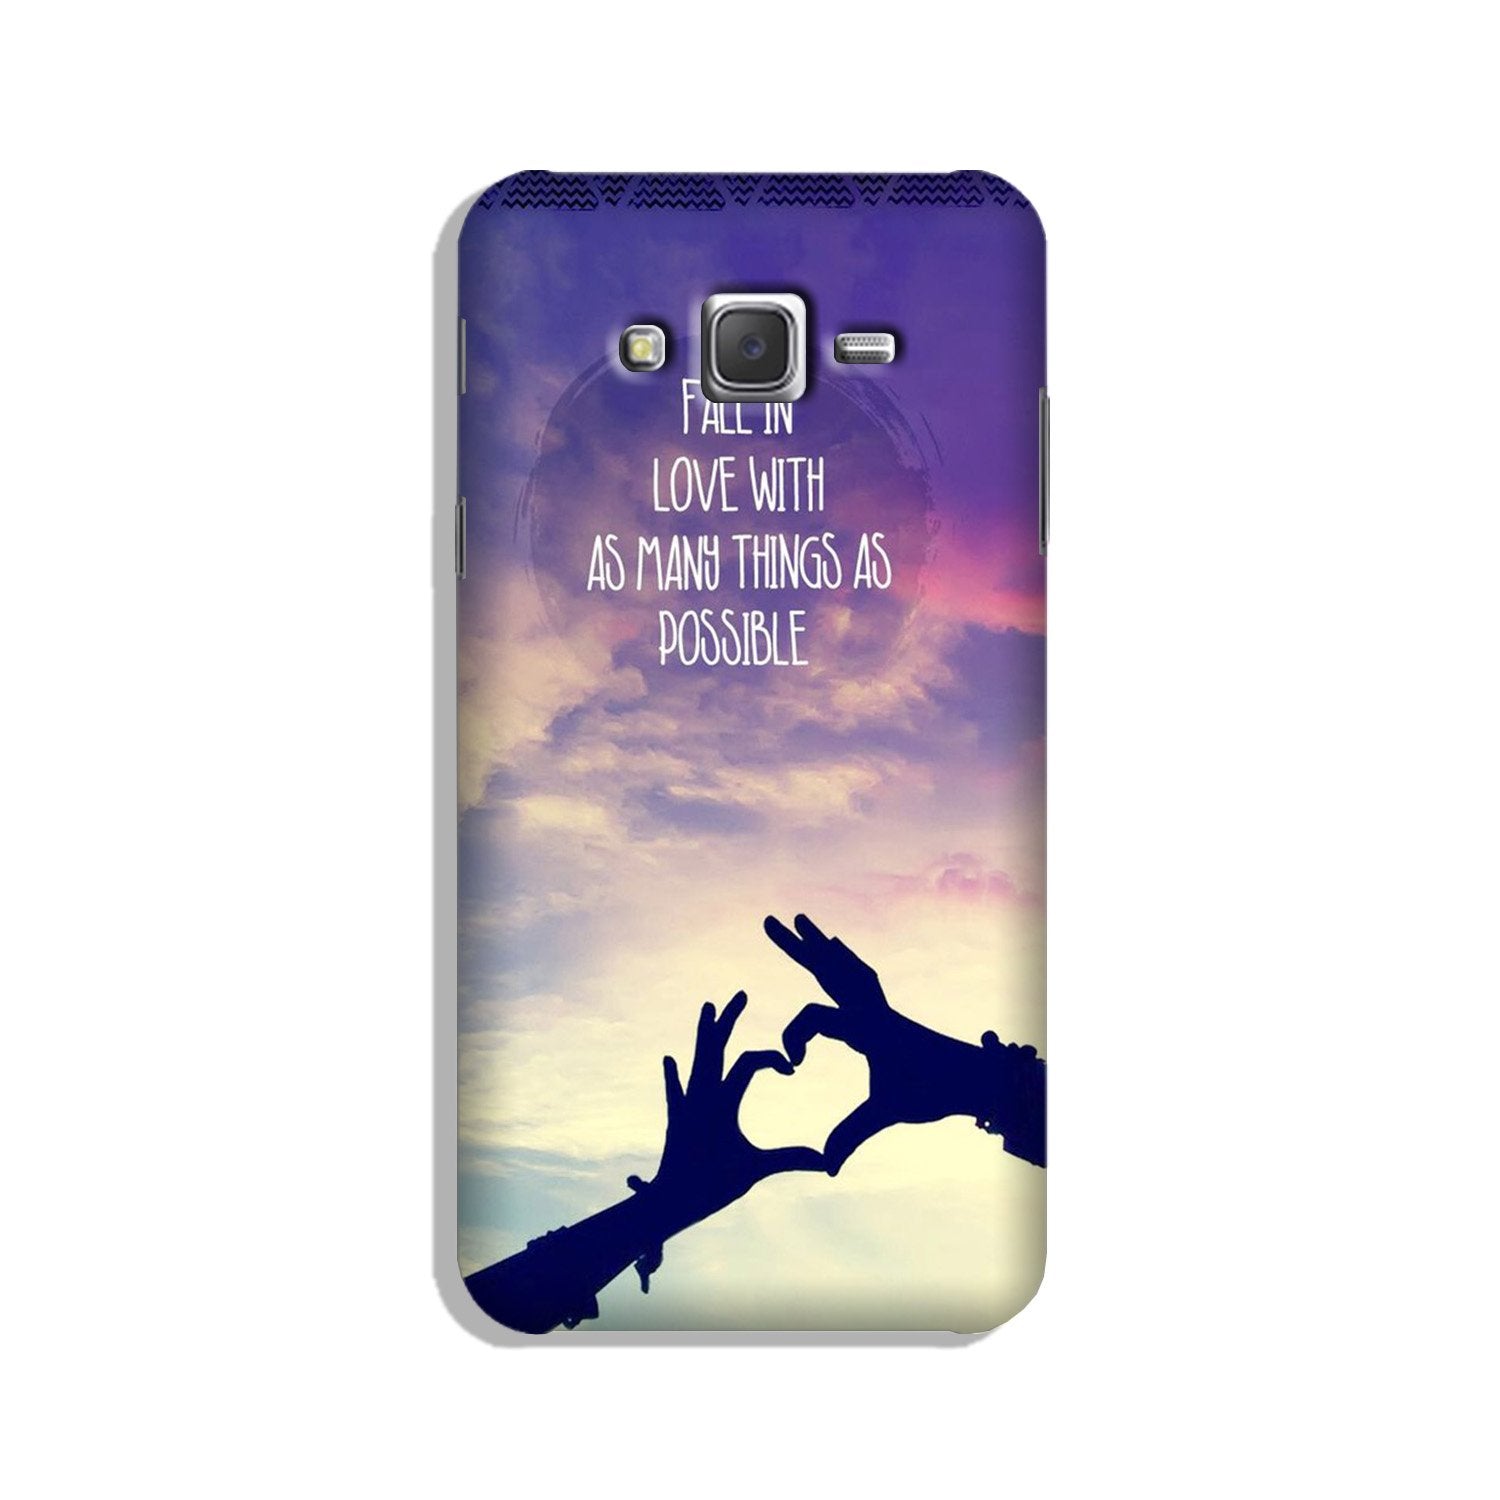 Fall in love Case for Galaxy J7 (2015)